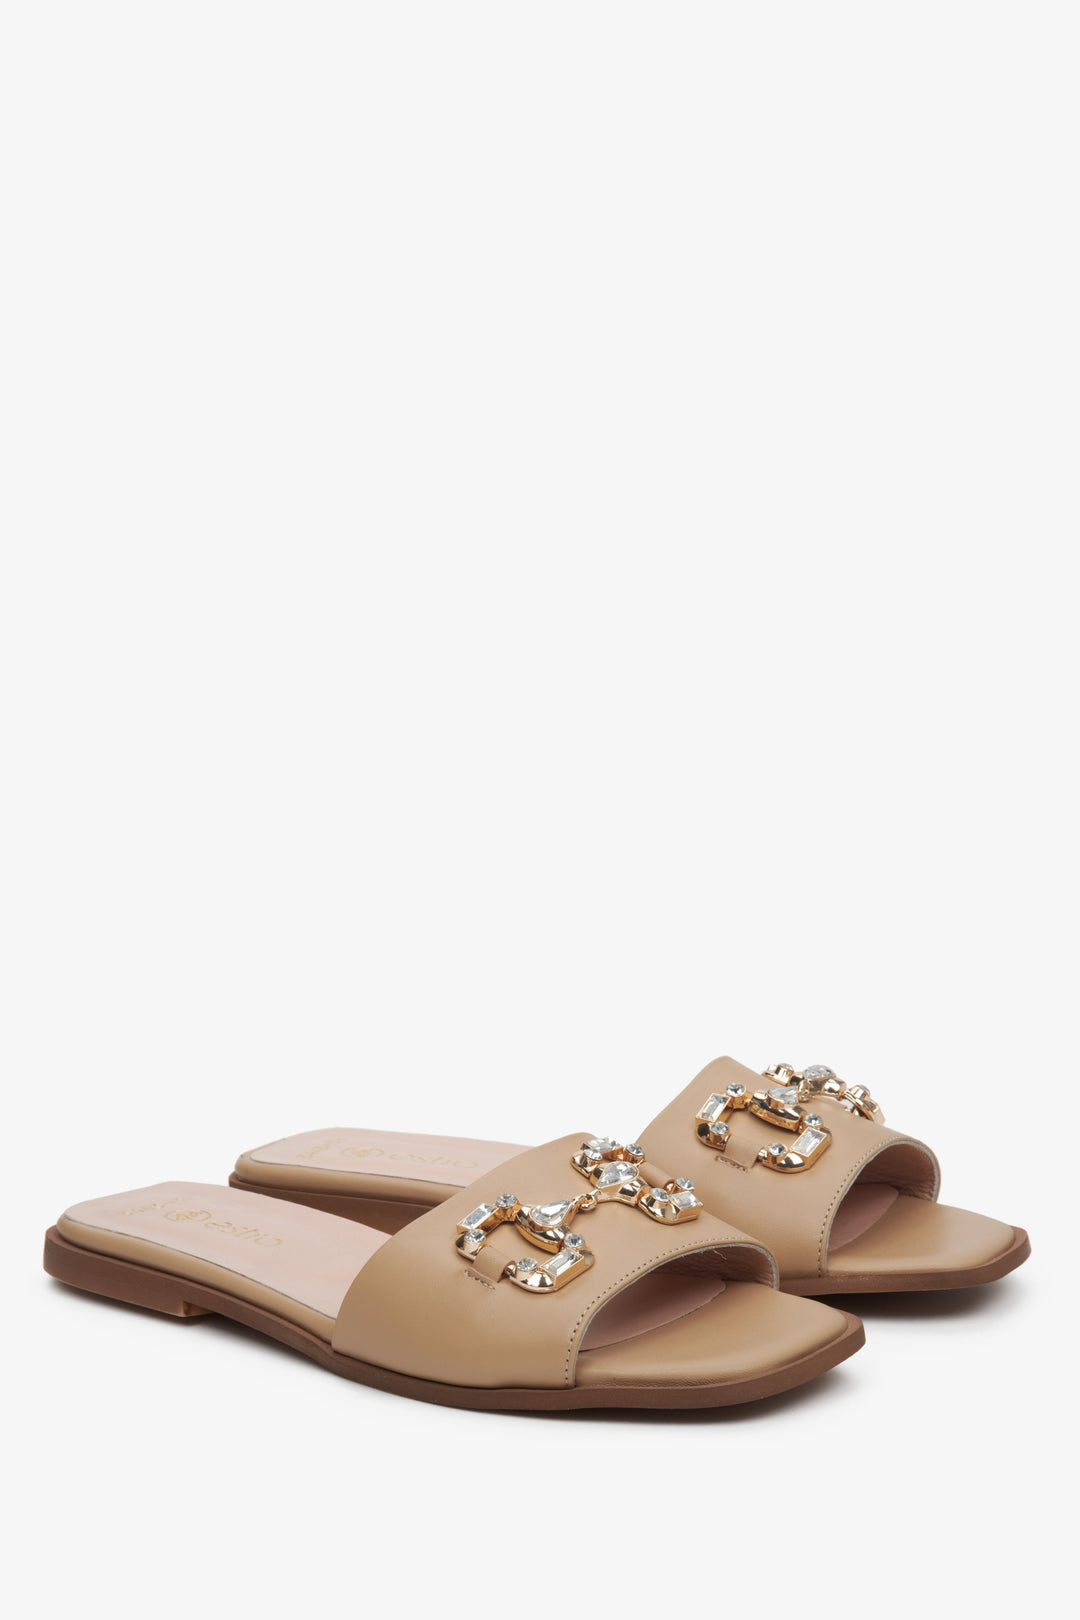 Women's slide sandals in beige with gold appliqué in Estro natural leather.